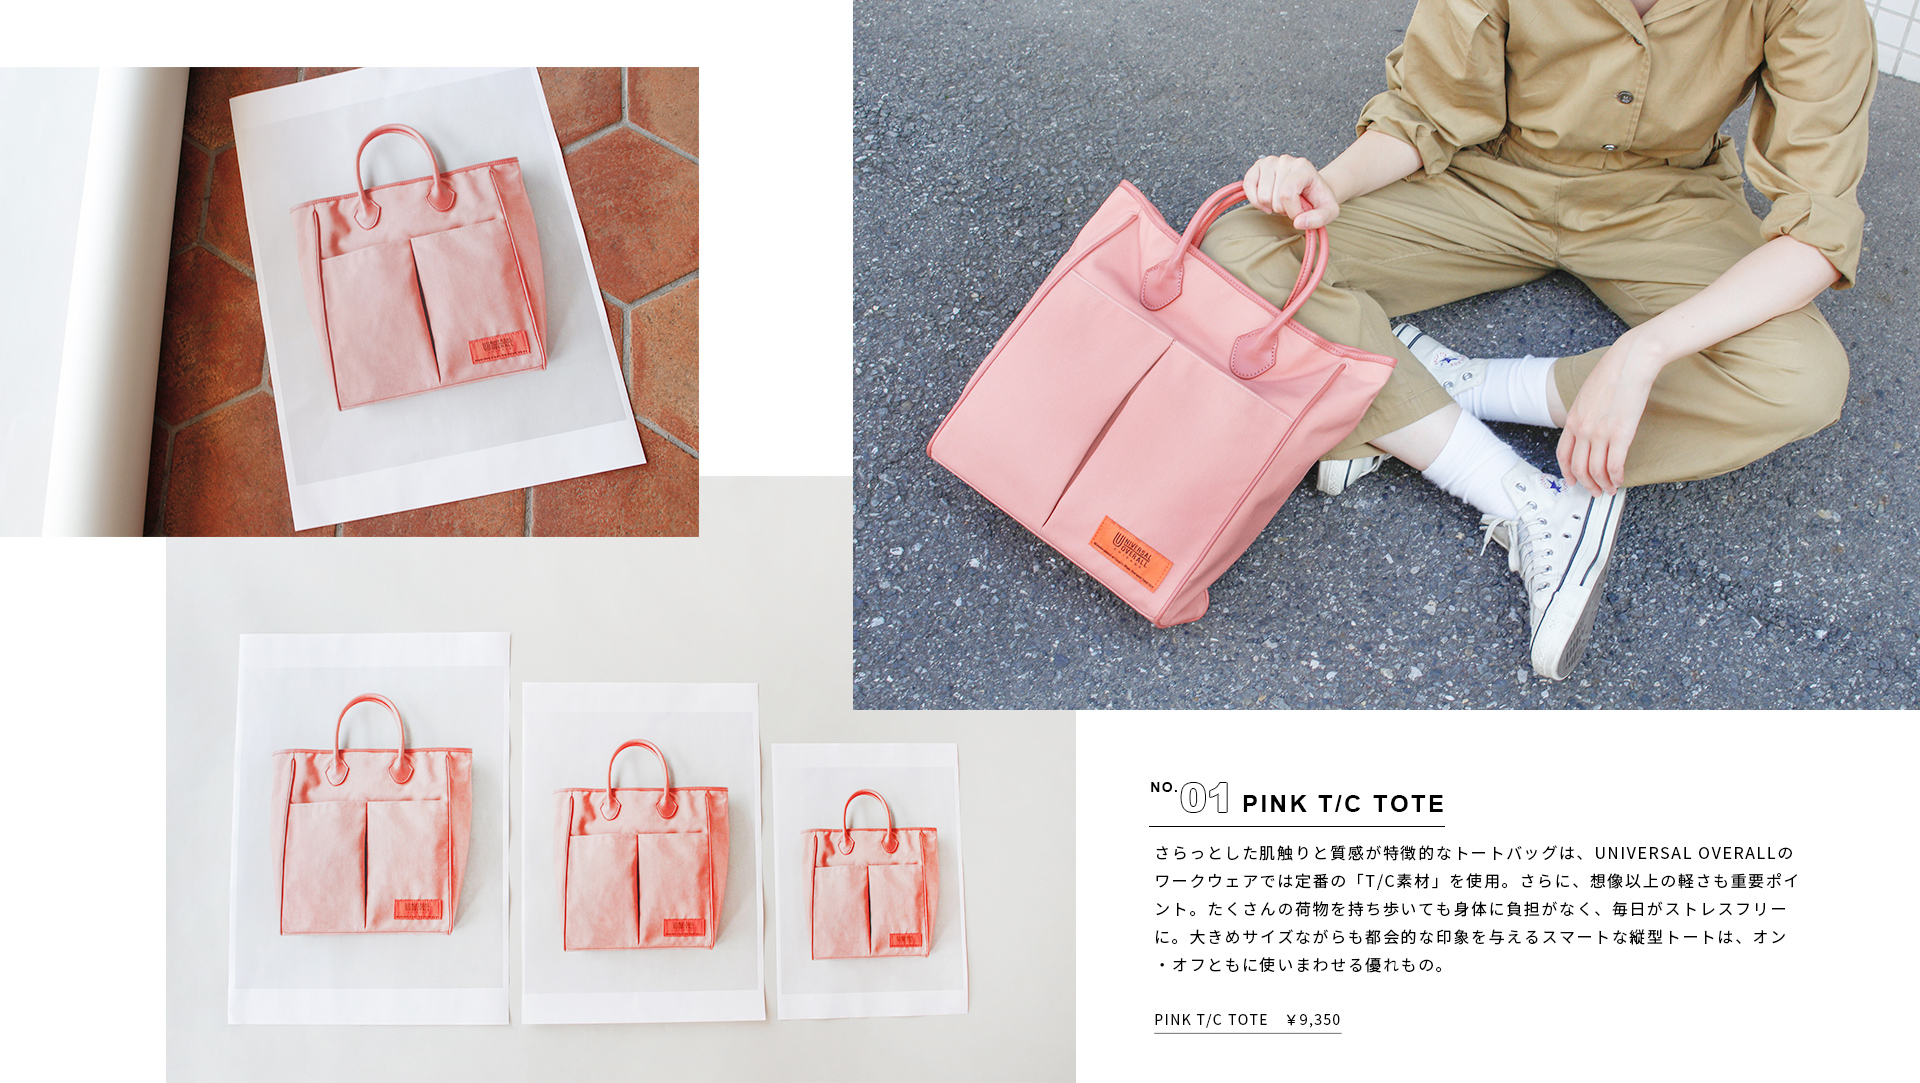 PINK T/C TOTE